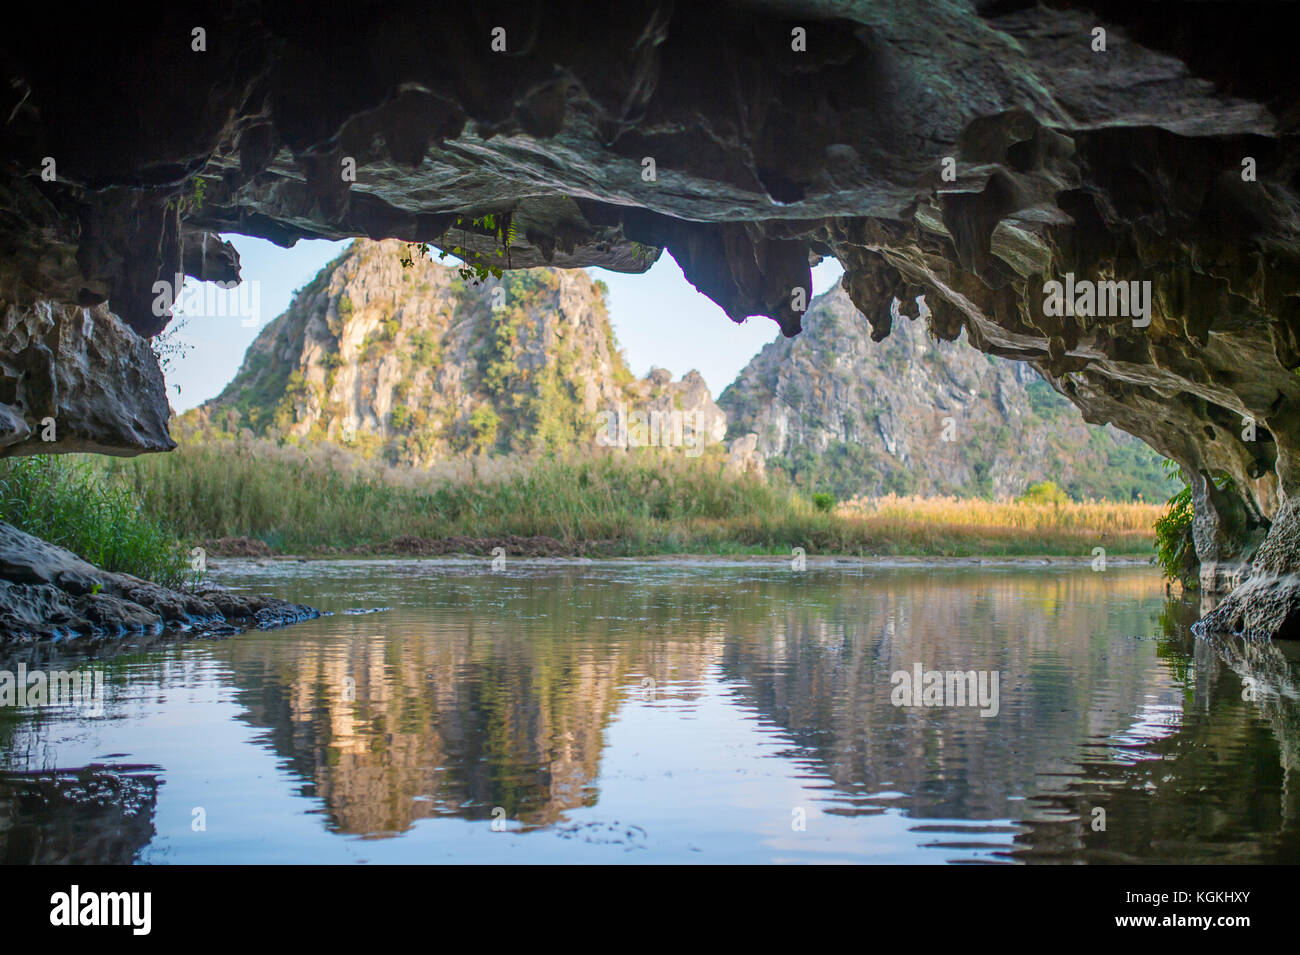 - Selective Focus- View from inside a cave of the Ngo Dong River at the Tam Coc portion, Ninh Binh Province, Vietnam. Stock Photo